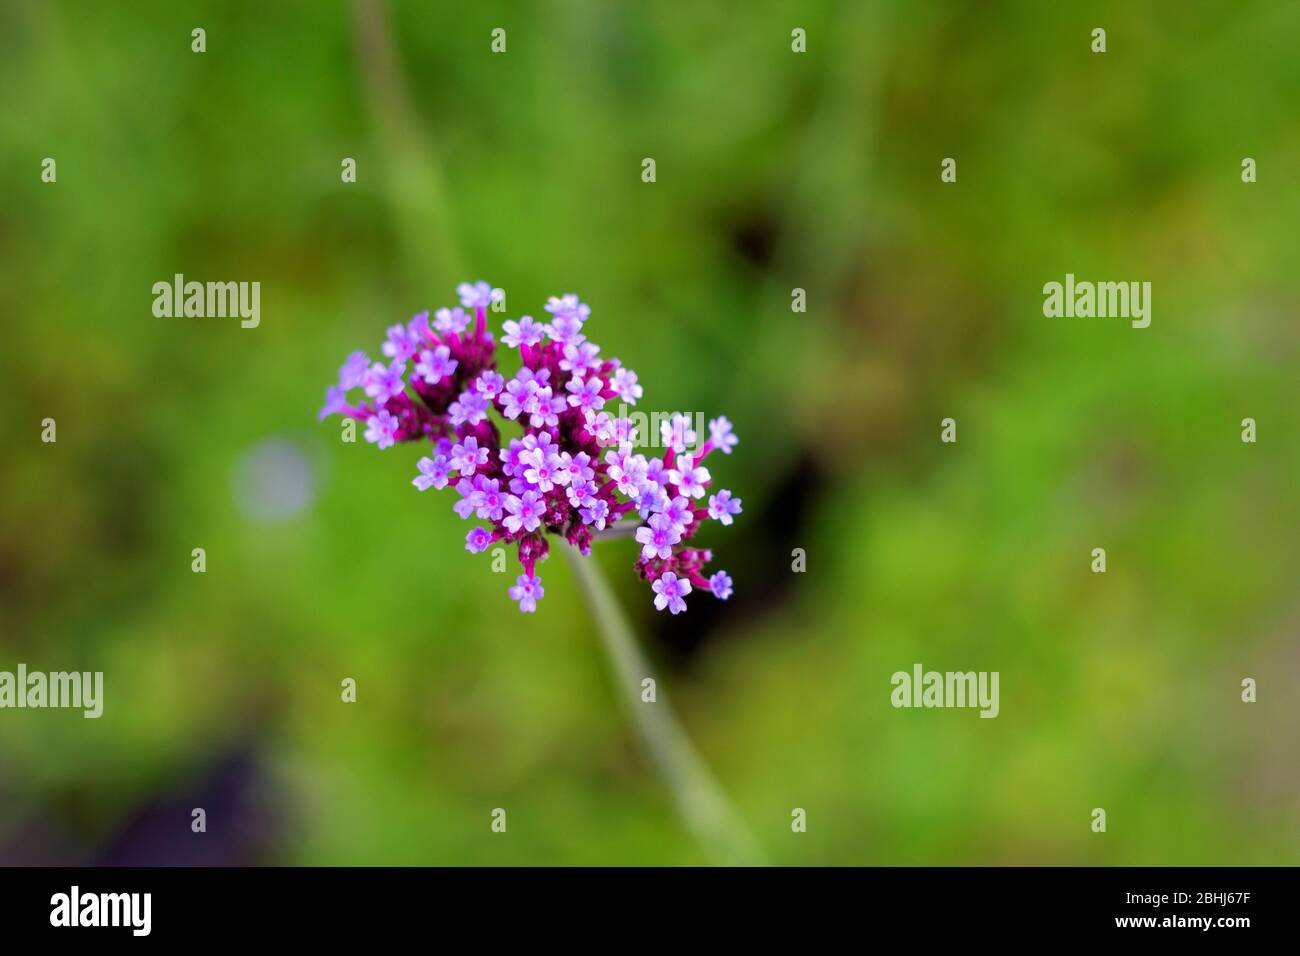 A close up portrait of a cluster of small purple flowers of a verbena bonariensis lollipop flower plant. It is part of the verbenaceae family. Stock Photo